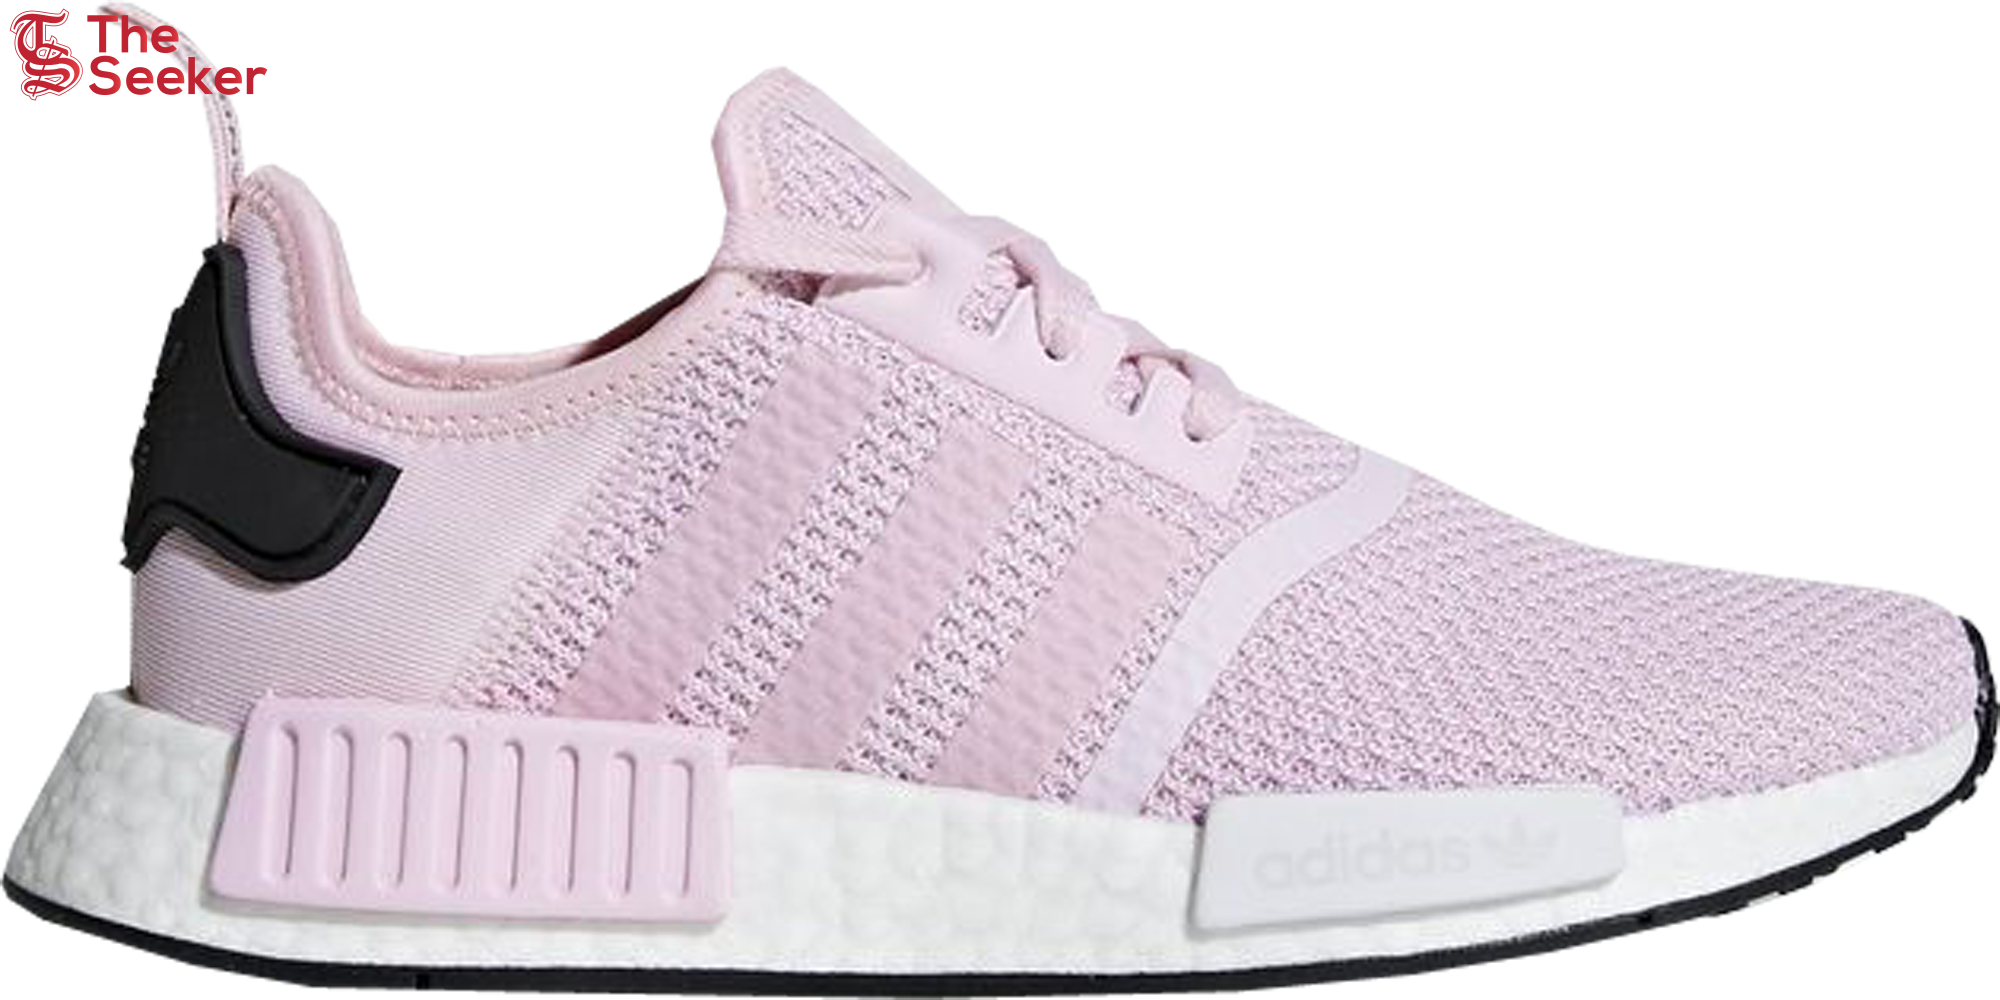 adidas NMD R1 Clear Pink (Women's)